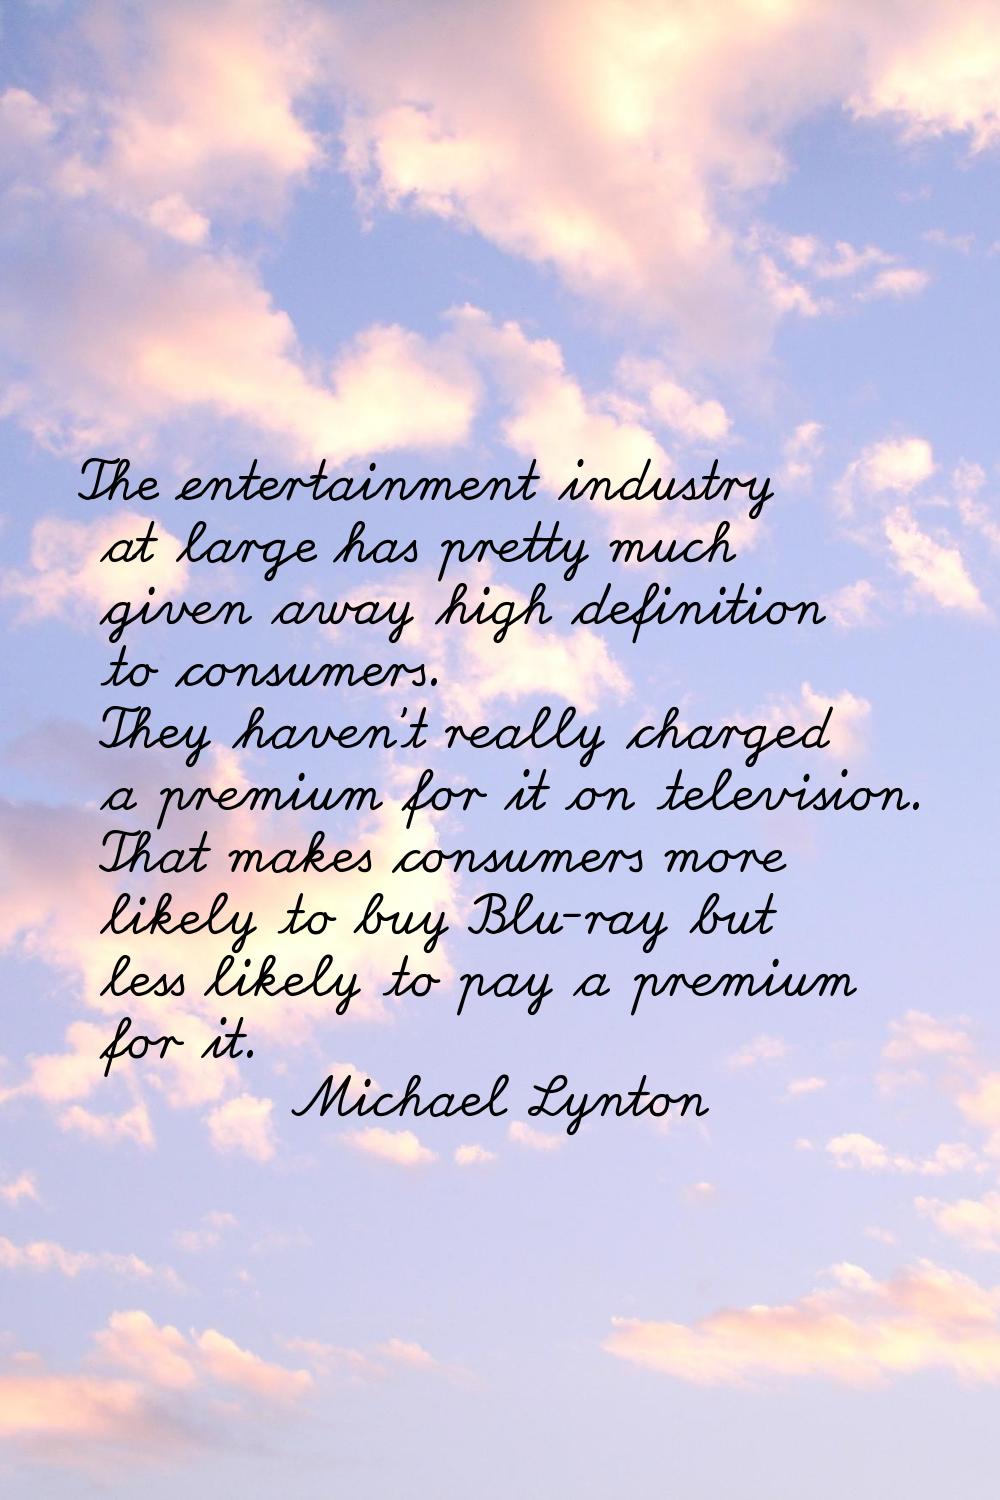 The entertainment industry at large has pretty much given away high definition to consumers. They h